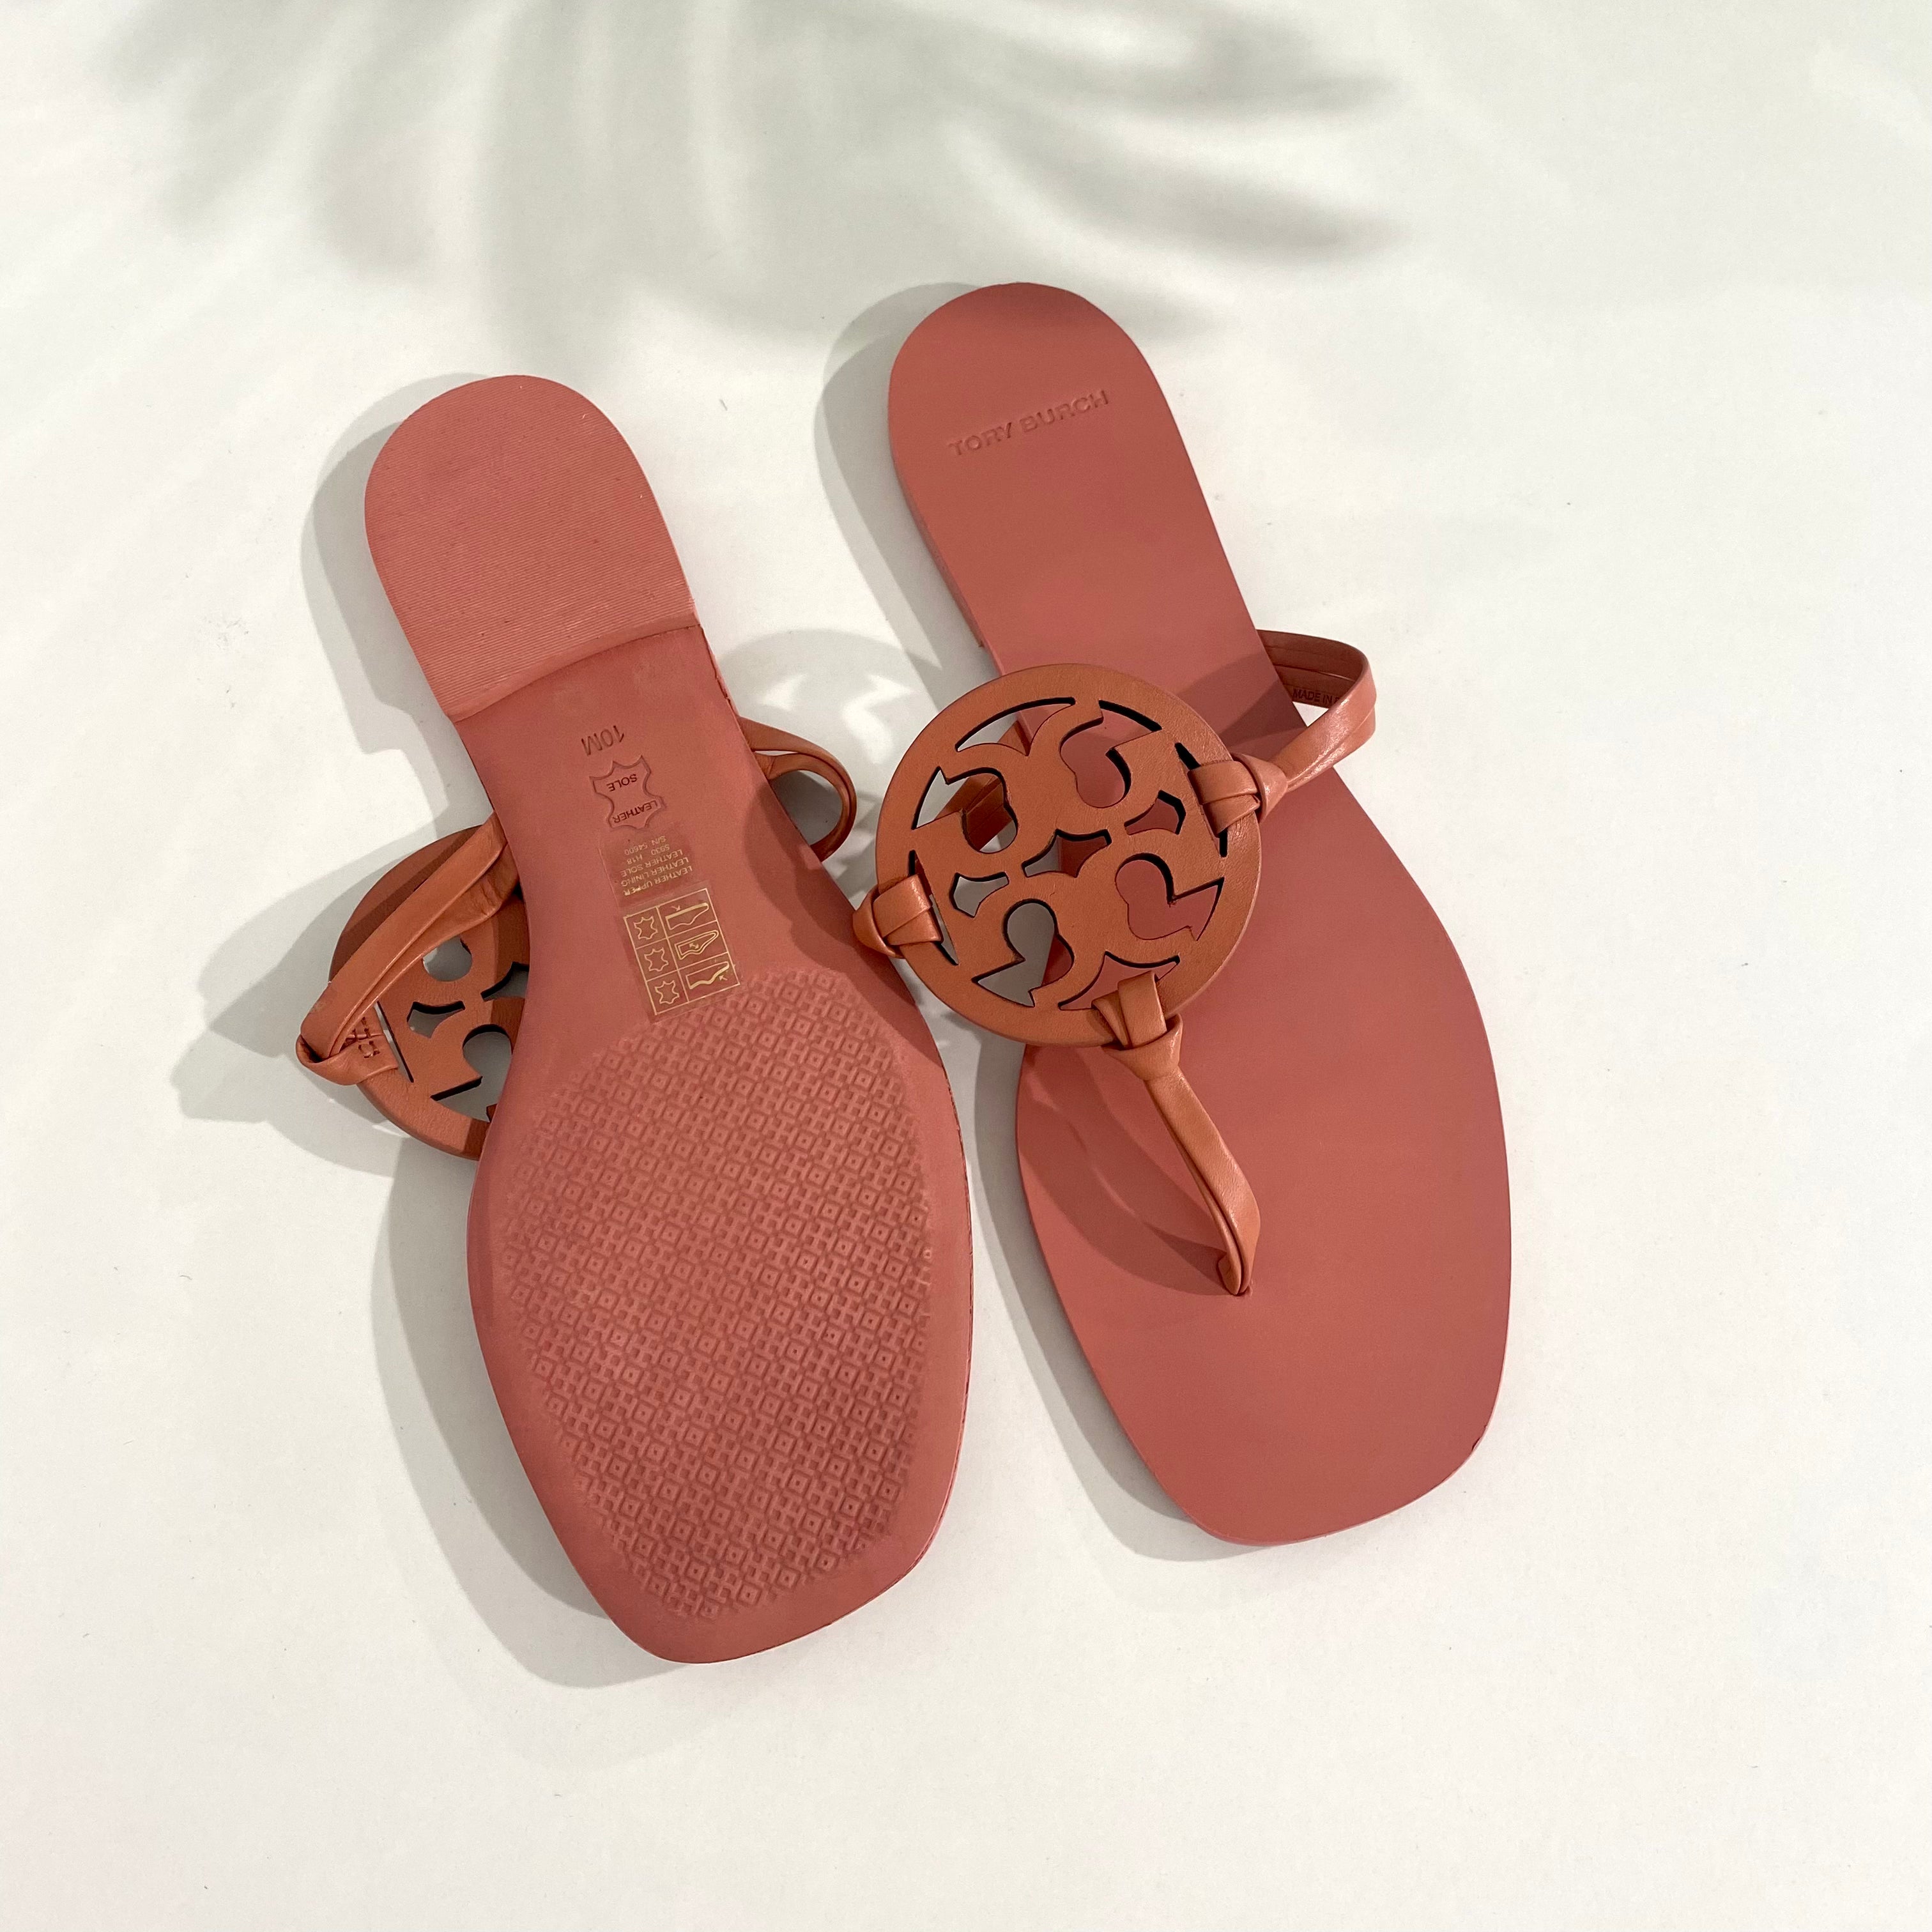 Leather sandals Tory Burch Pink size 8 US in Leather - 26652129